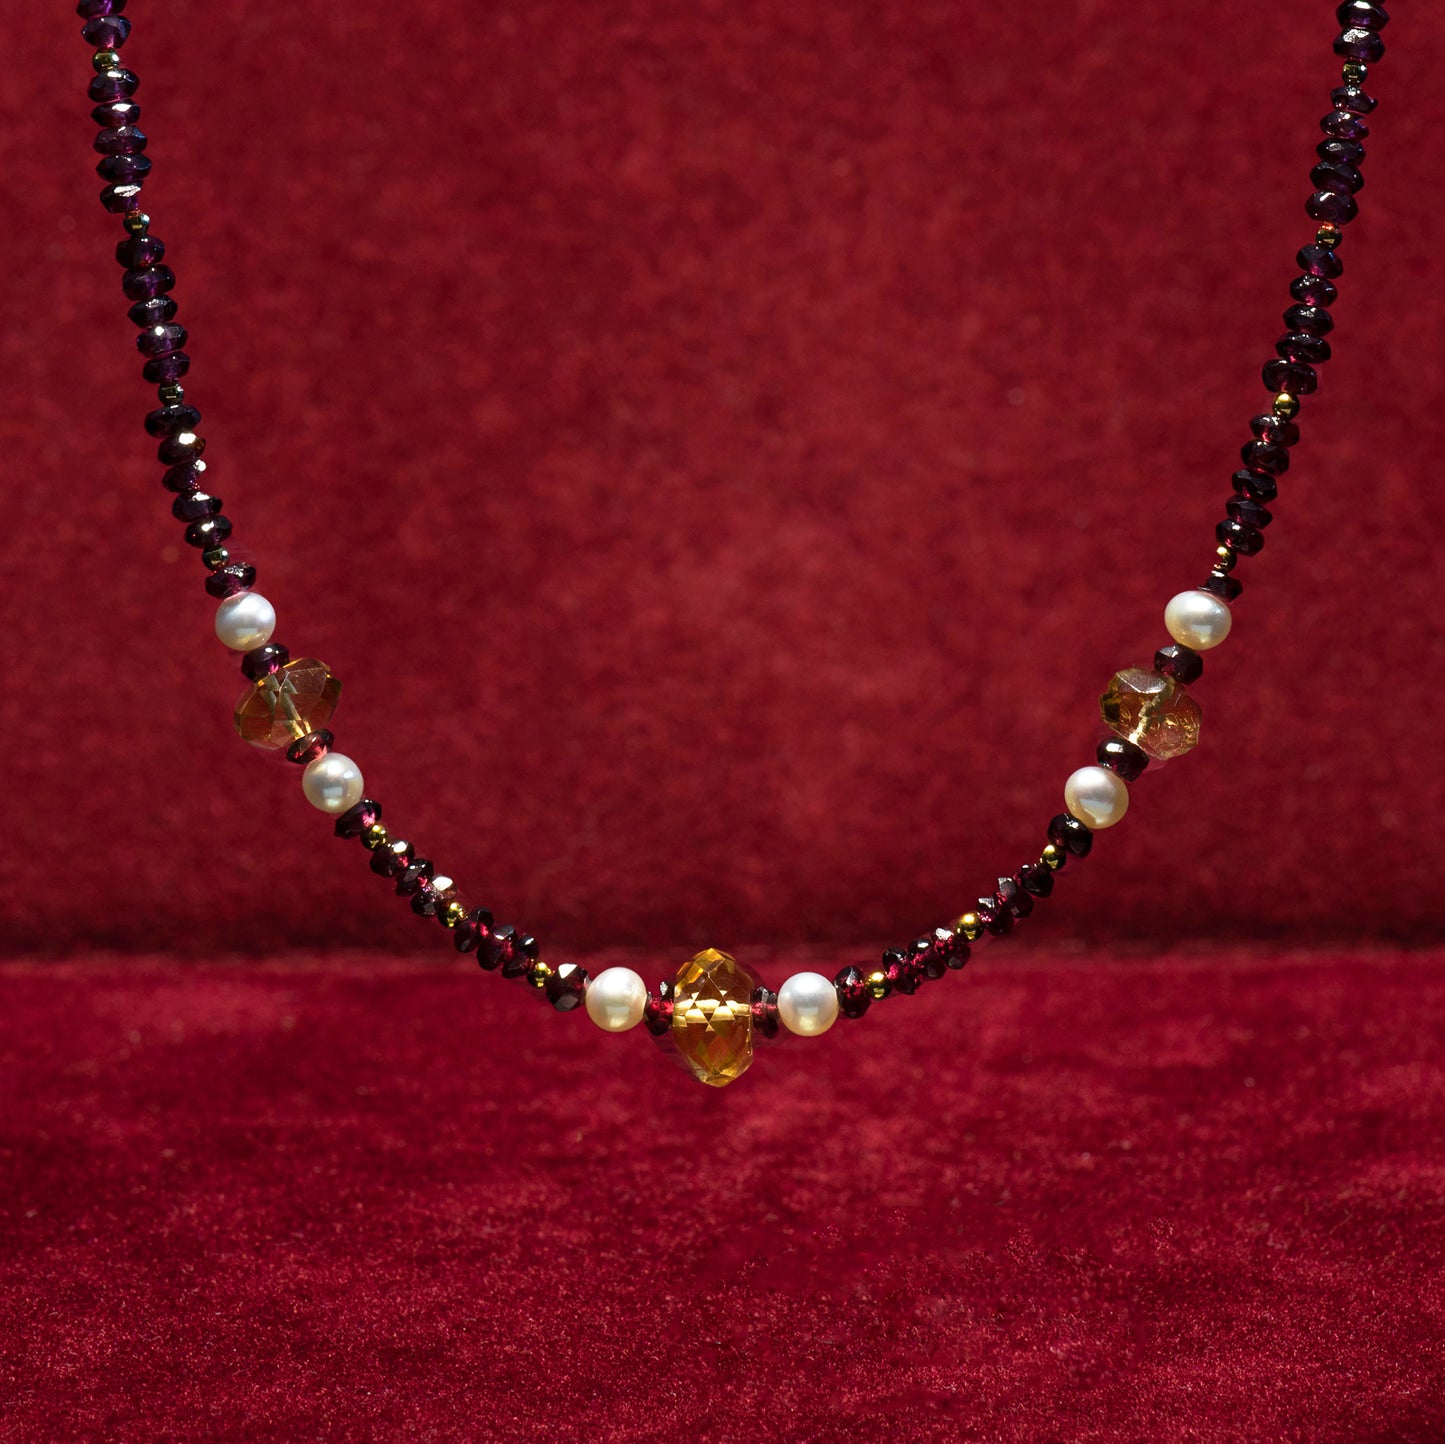 Garnets,citrines,pearls and 18K gold necklace.